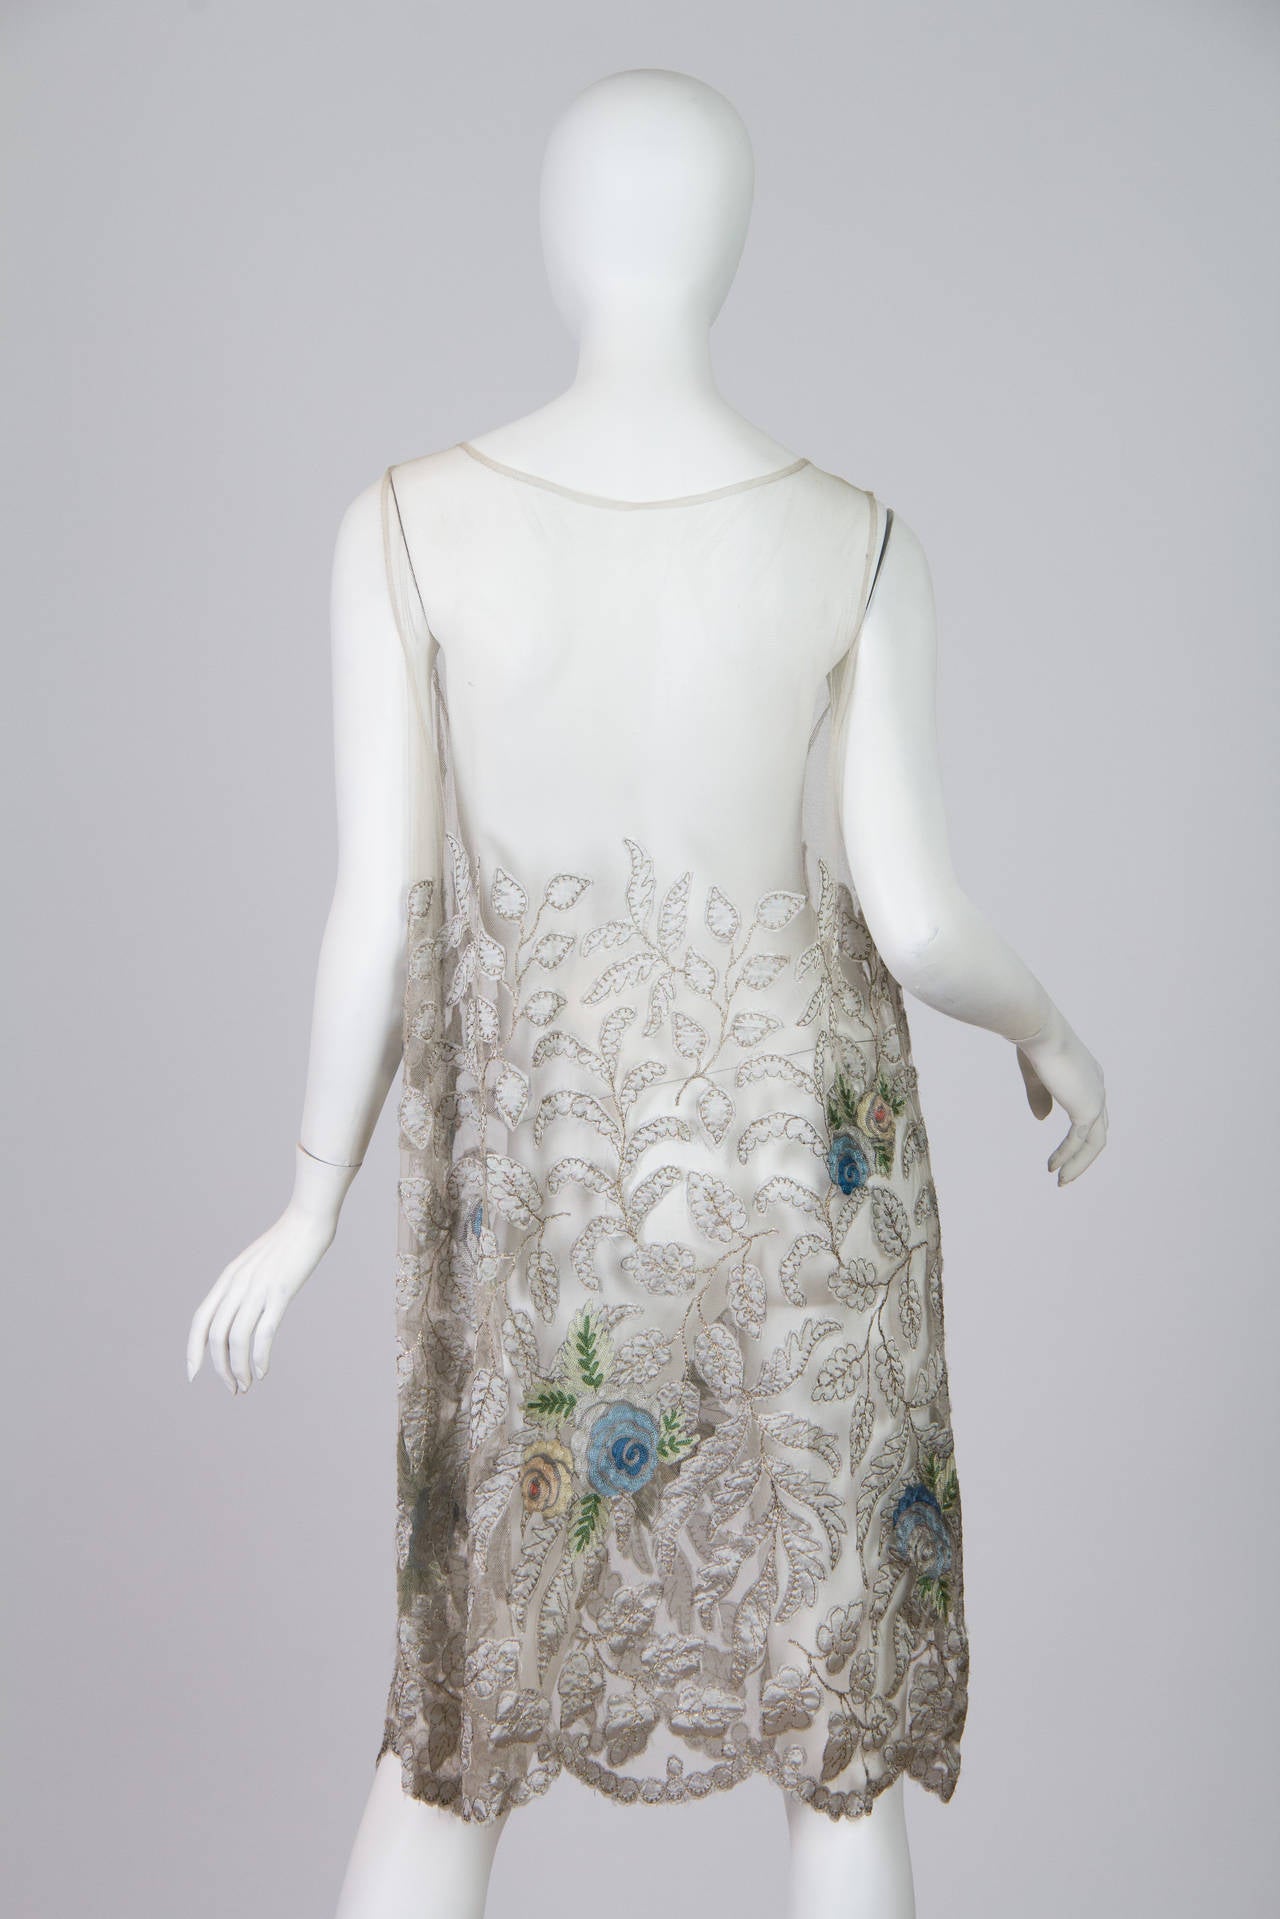 Women's 1920s Embroidered and Appliqued Silk Net Dress